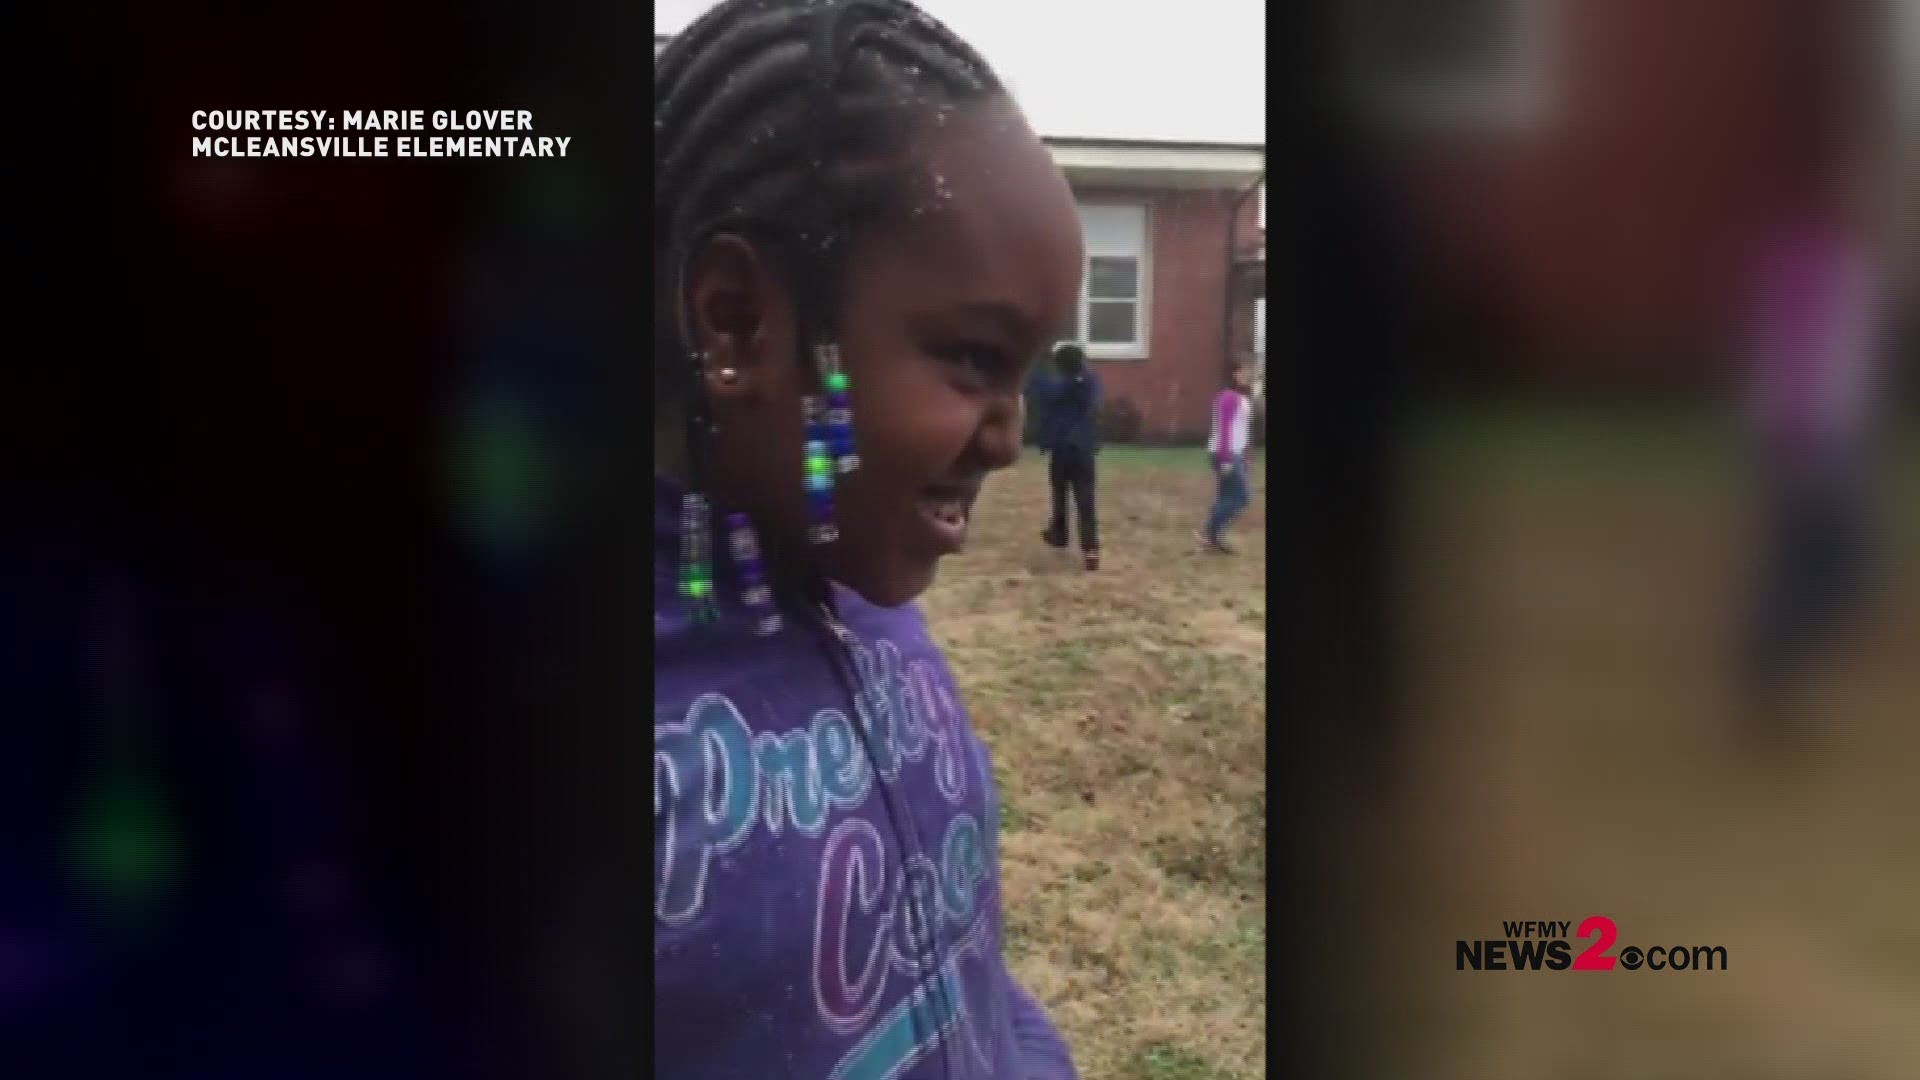 Cyanna, a 5th grader at McLeansville Elementary in Guilford County. Cyanna's family relocated to the Triad, from St. Thomas, after Hurricane Irma destroyed parts of the Caribbean. And Friday was her first time seeing, touching snow.